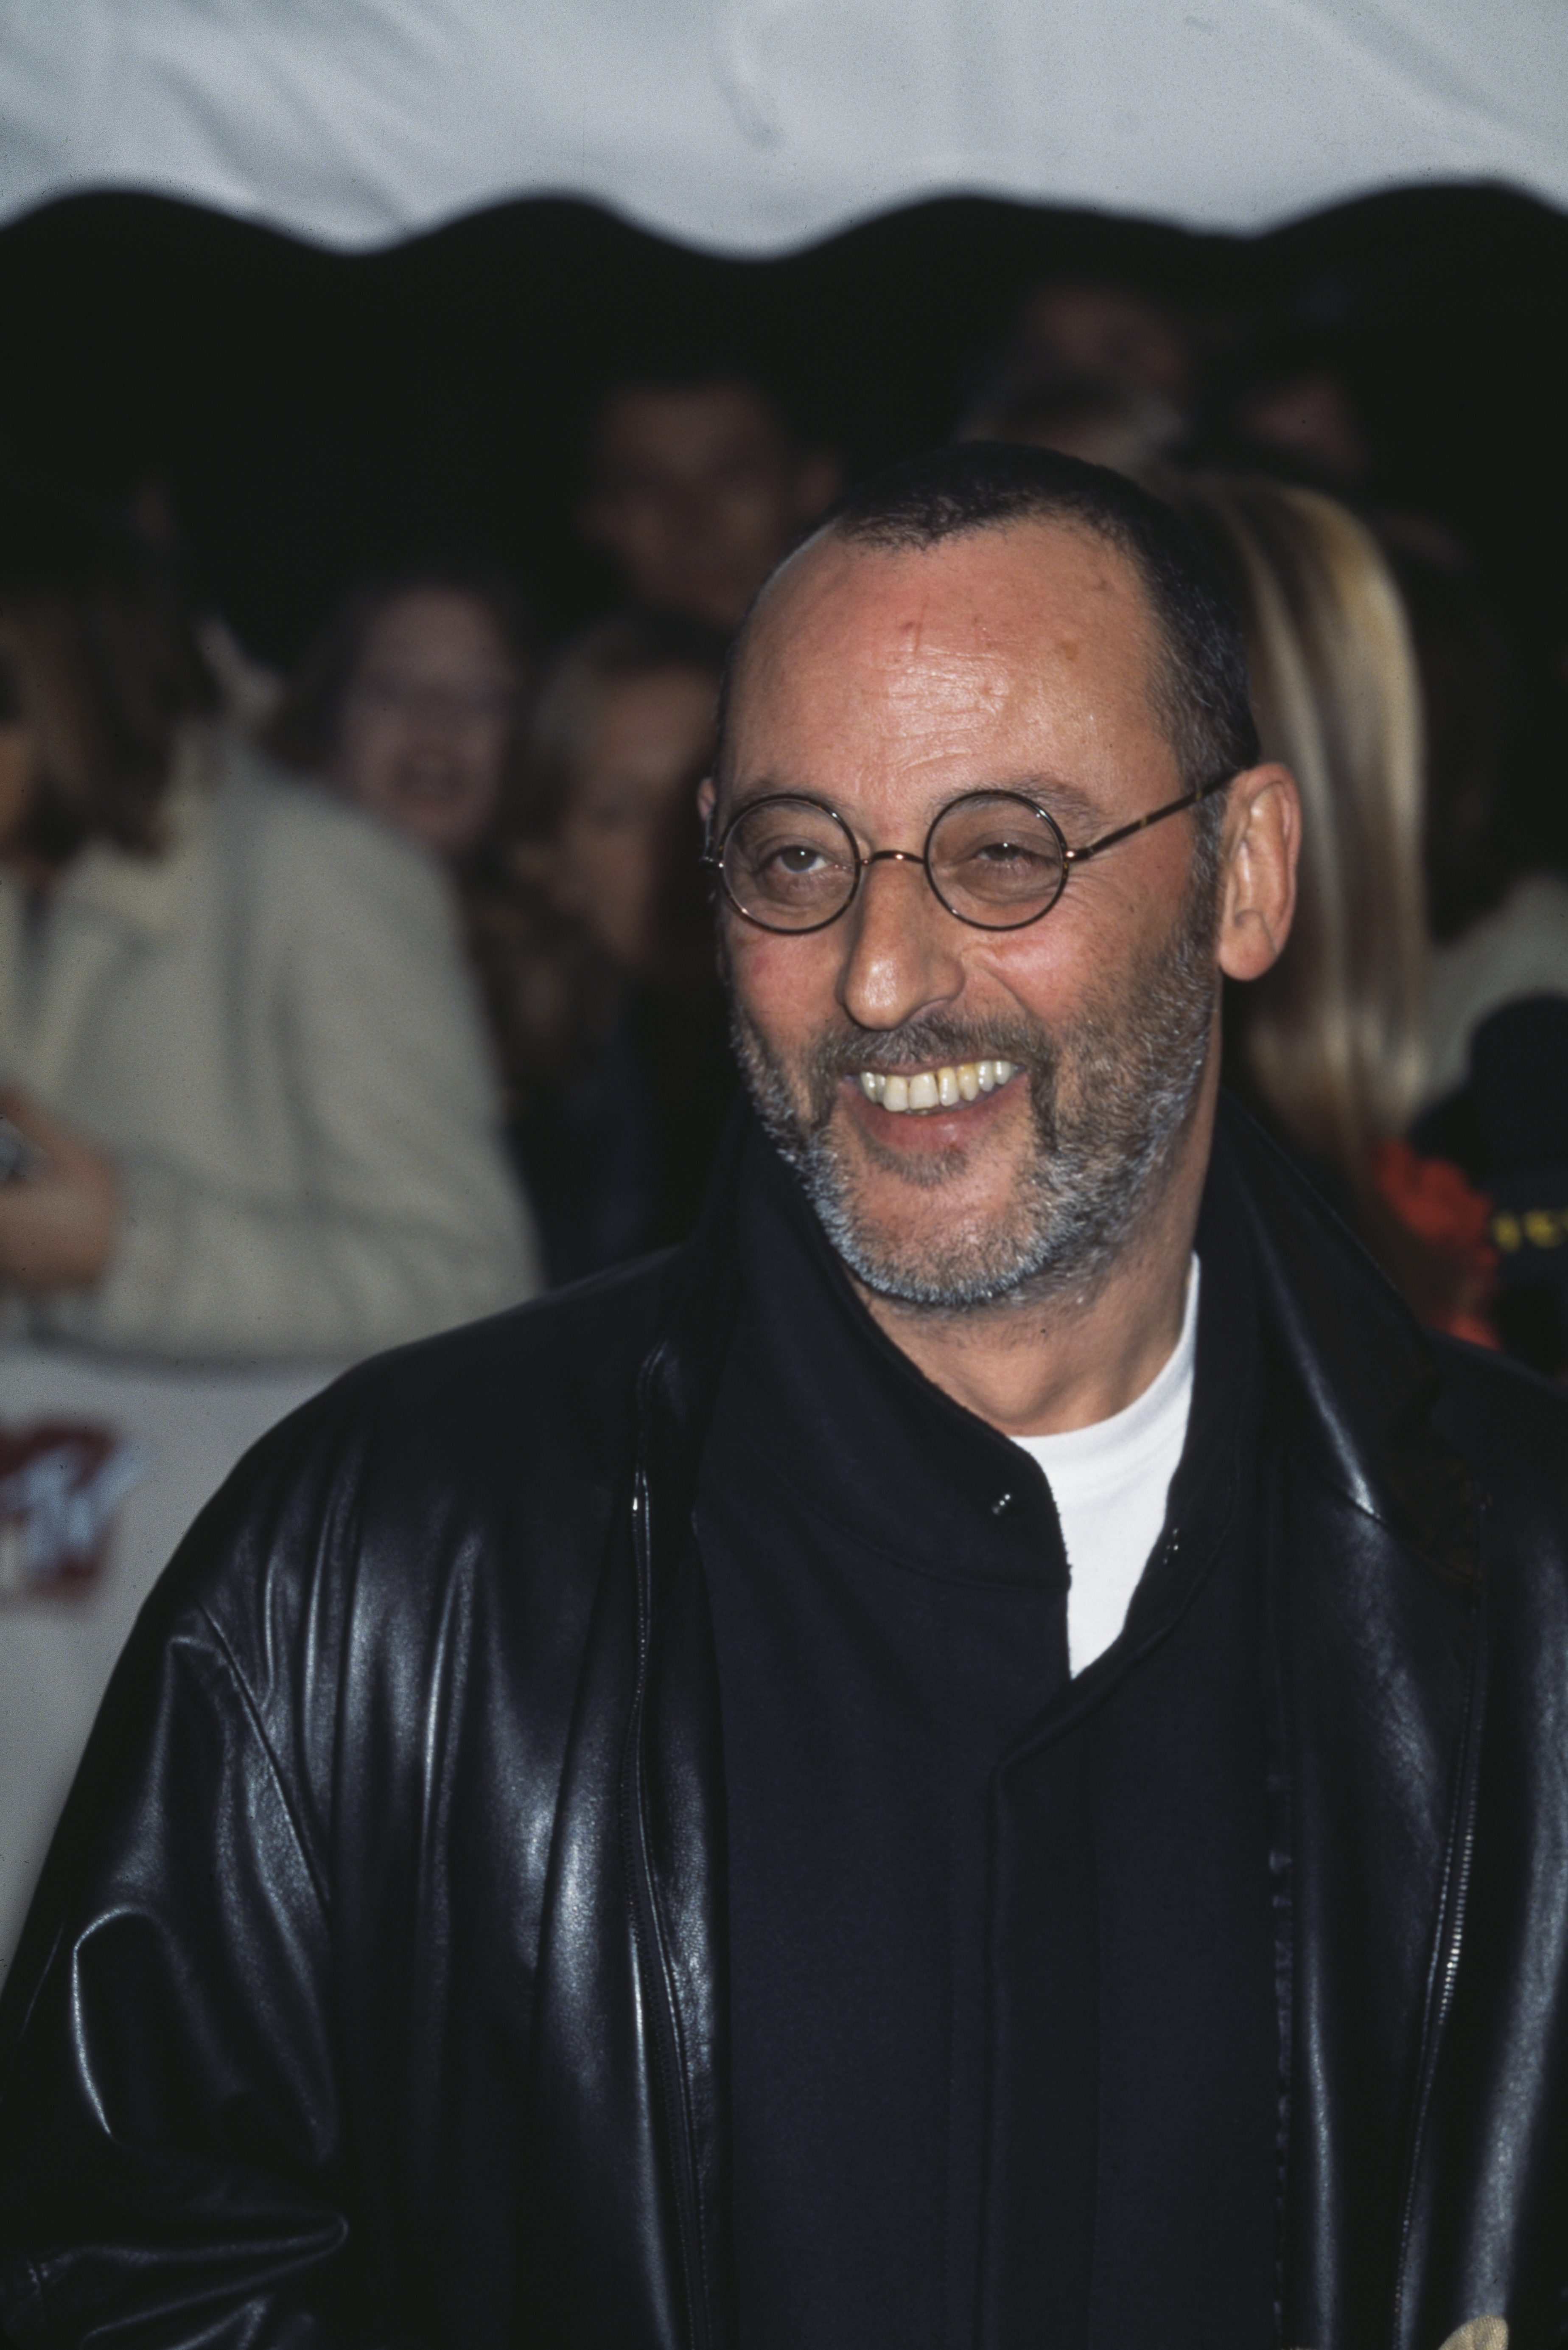 Jean Reno attends the 2000 MTV European Music Awards, held at the Ericsson Globe, Stockholm, Sweden, on November 16, 2000 | Source: Getty Images